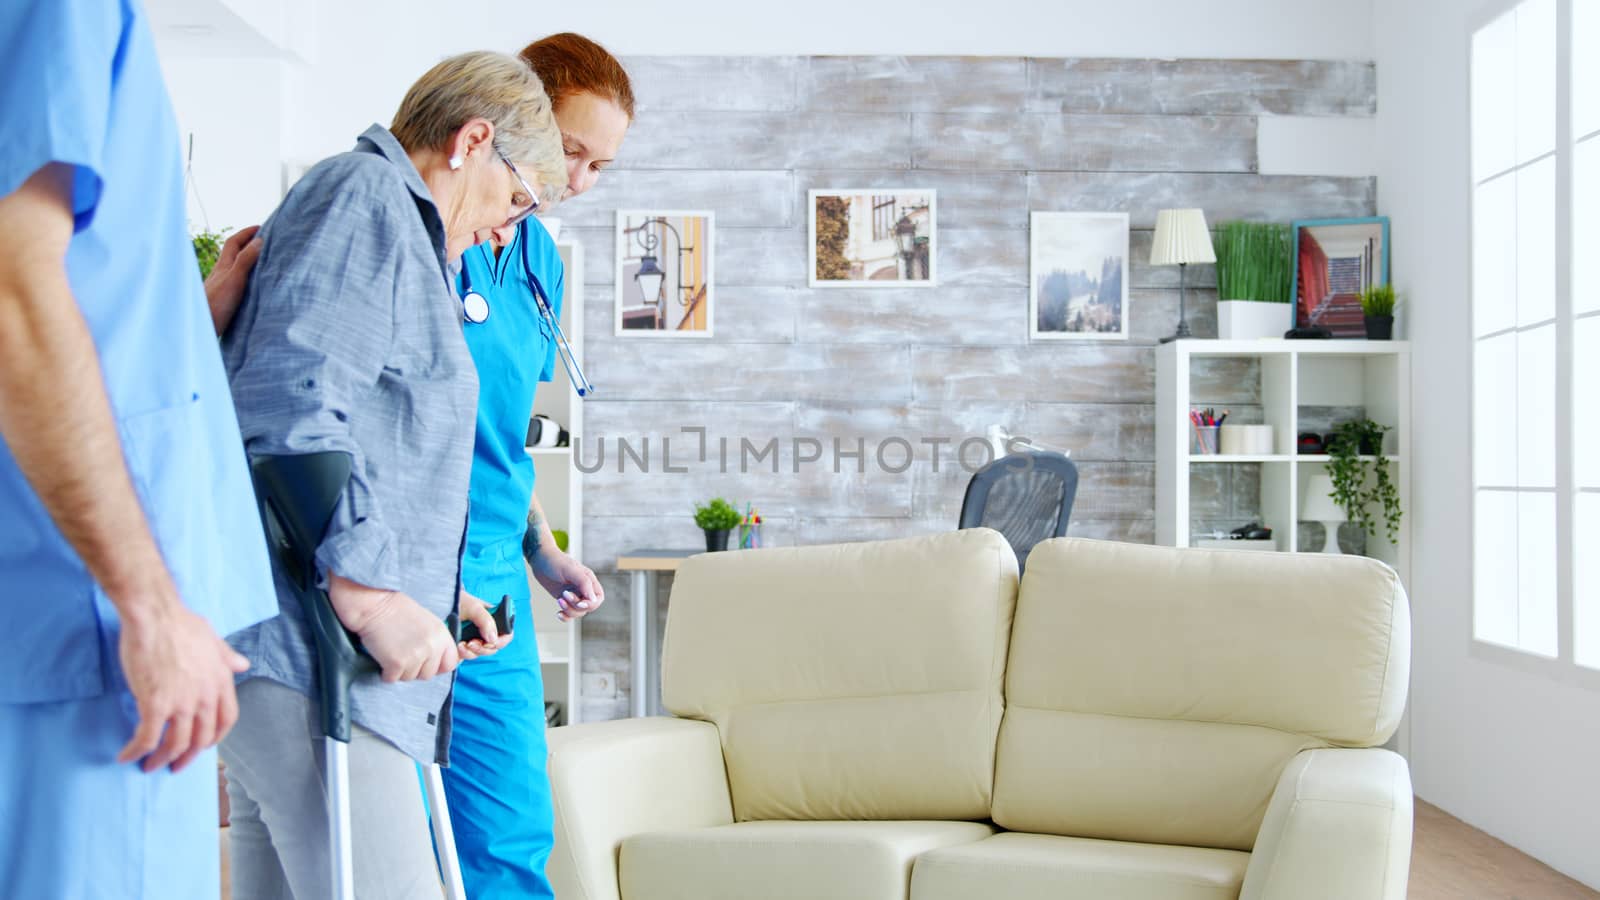 Nurse team helping old disabled lady to walk in the nursing home room. Caregiver and social worker